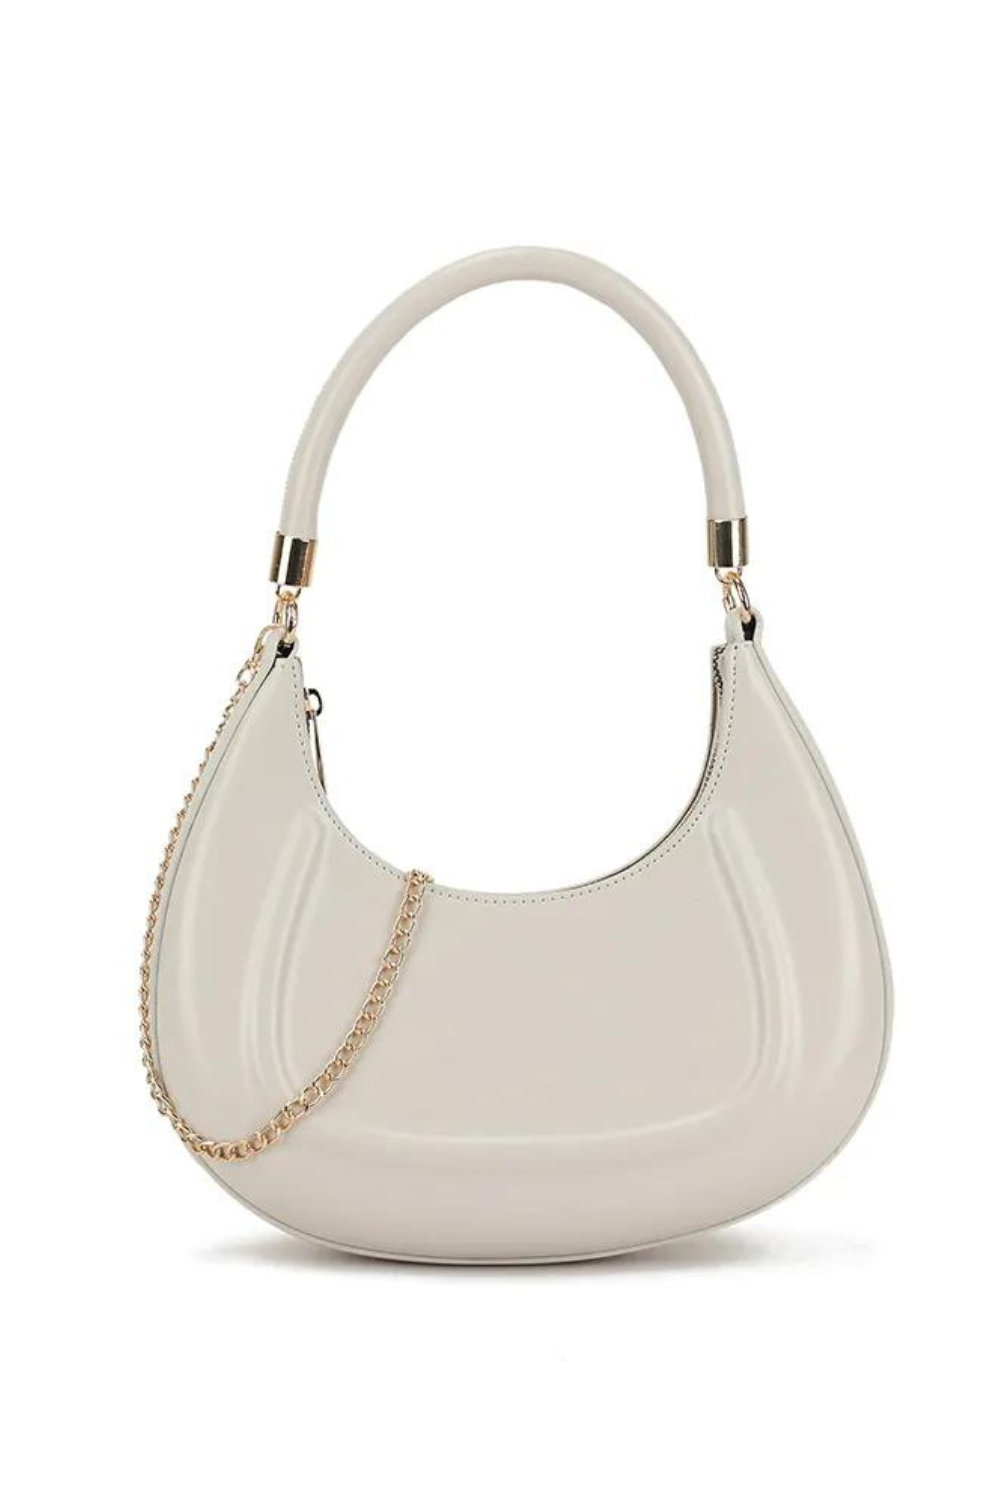 EMBER NUDE LEATHER HANDLE BAG WITH A GOLD CHAIN STRAP